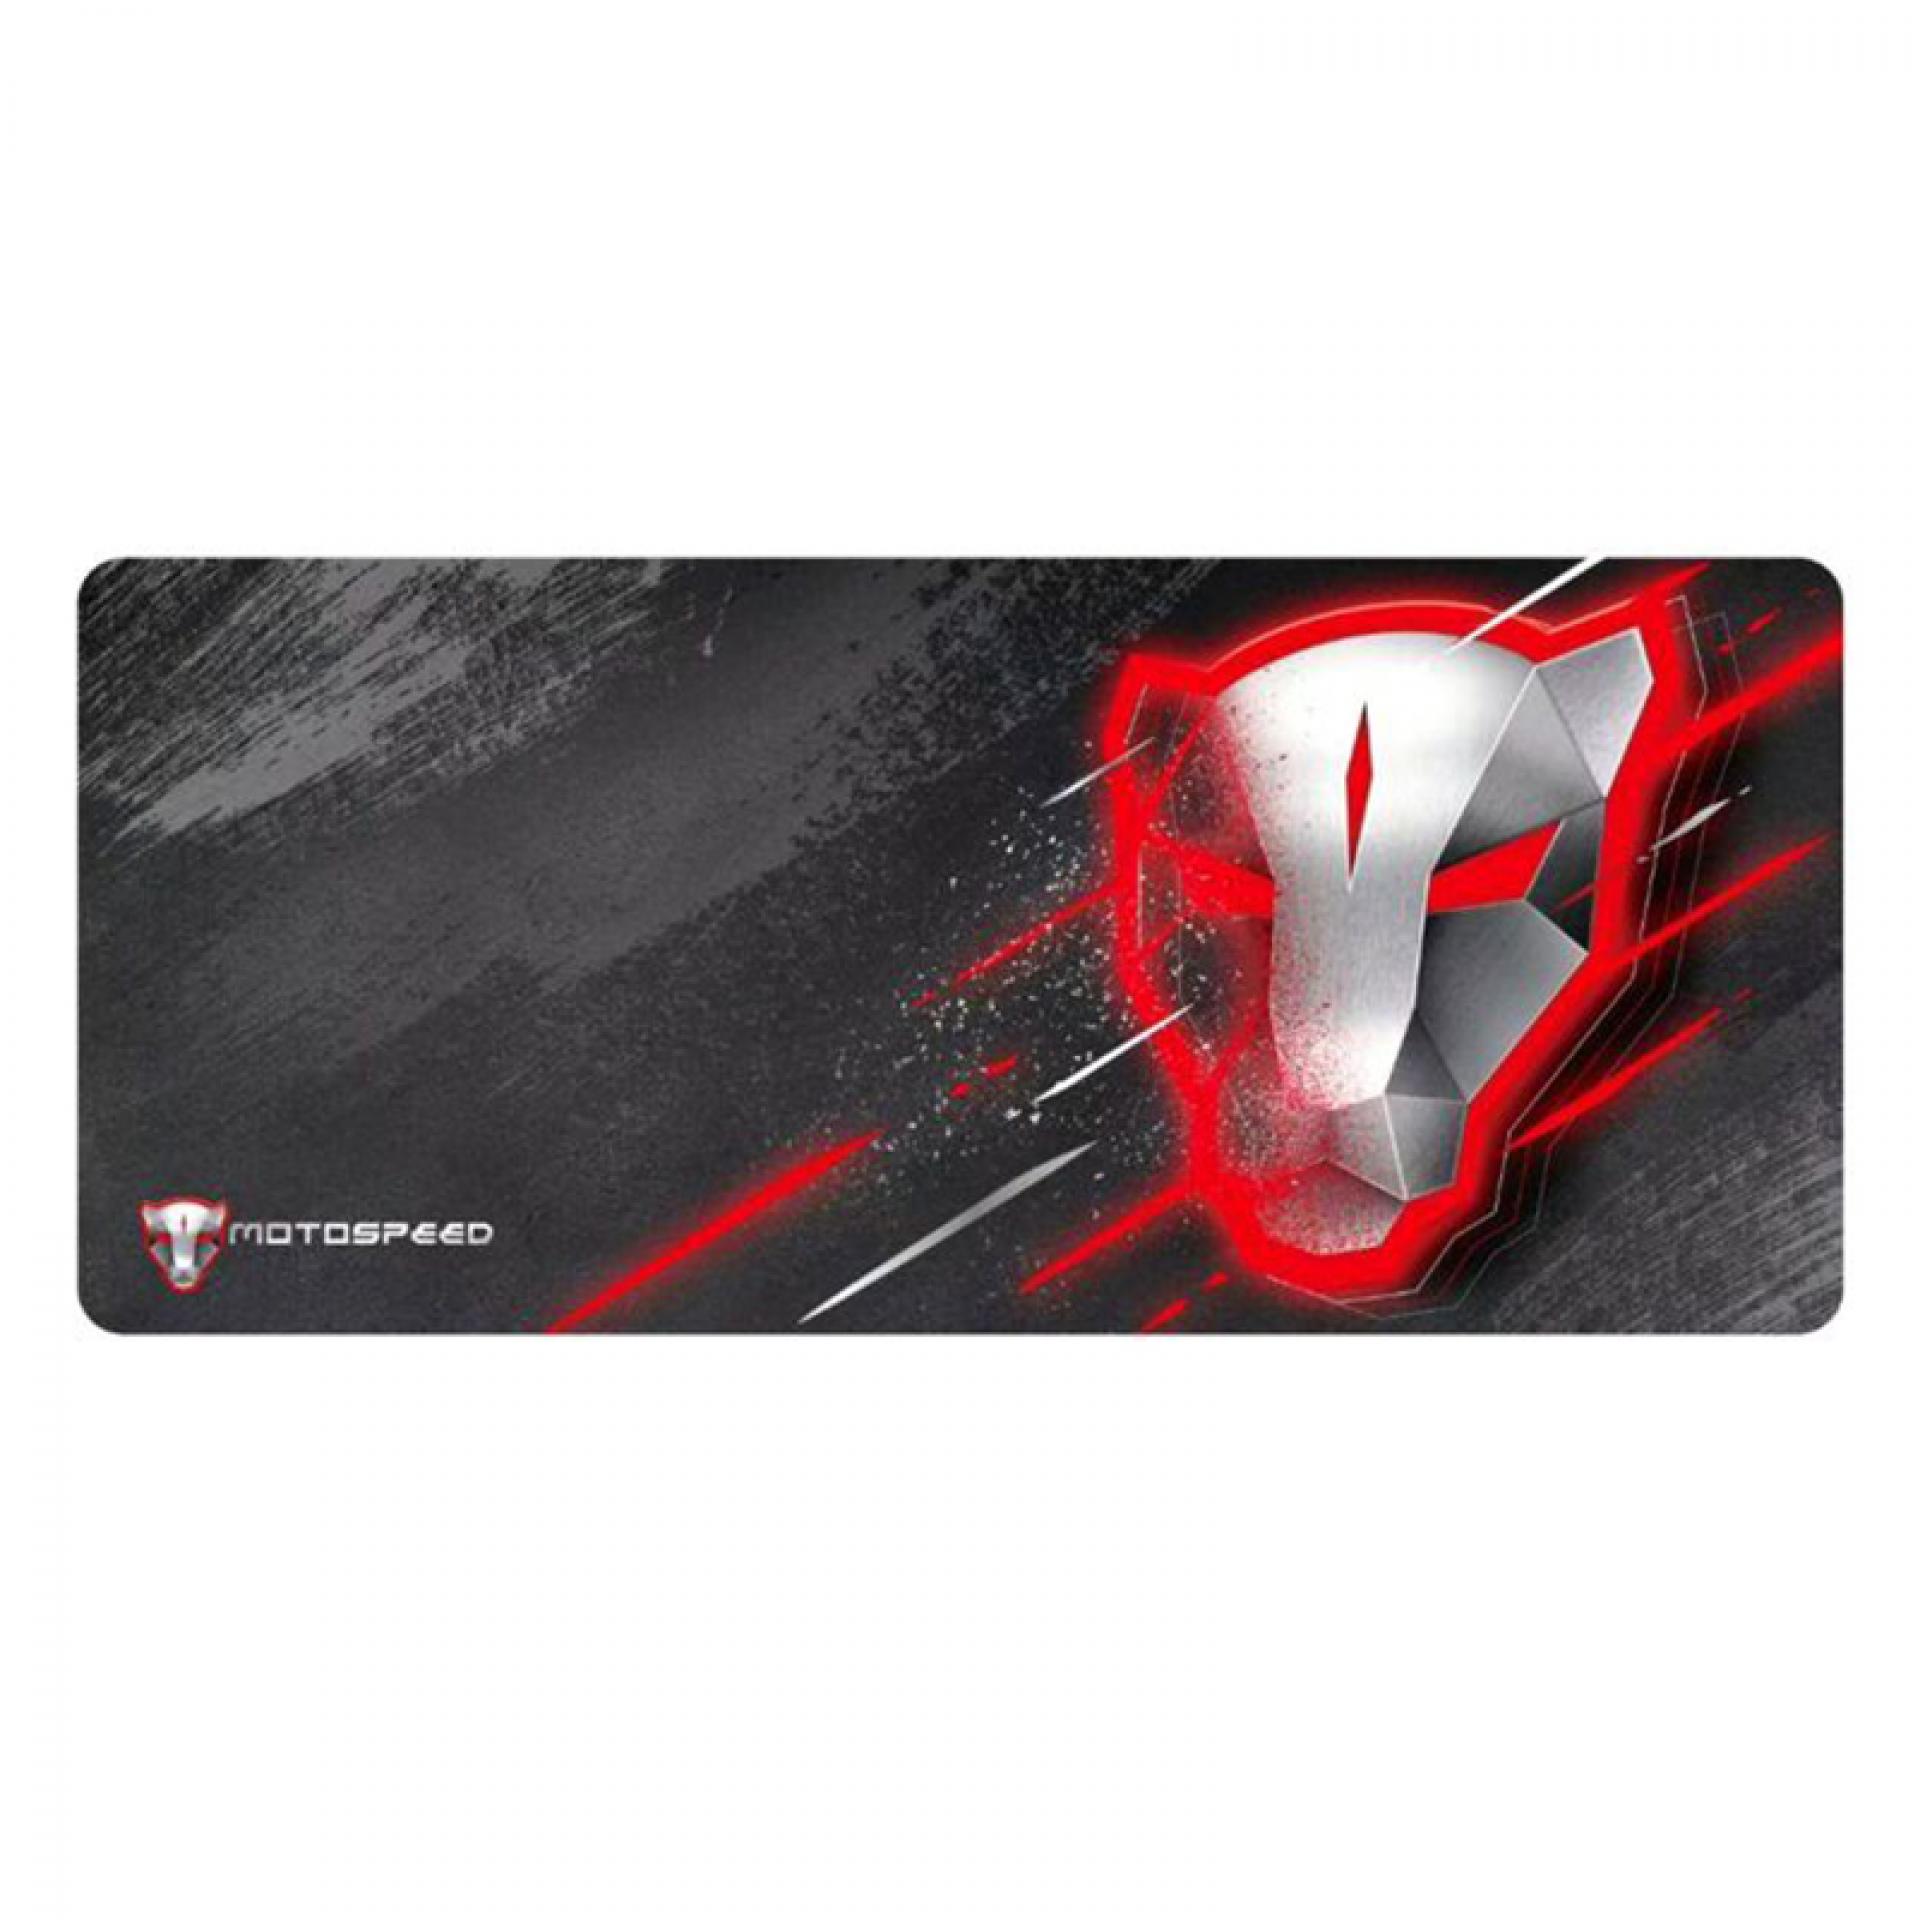 Motospeed P60 600 * 300 * 3 mm Professional Gaming Mouse Mat Pad